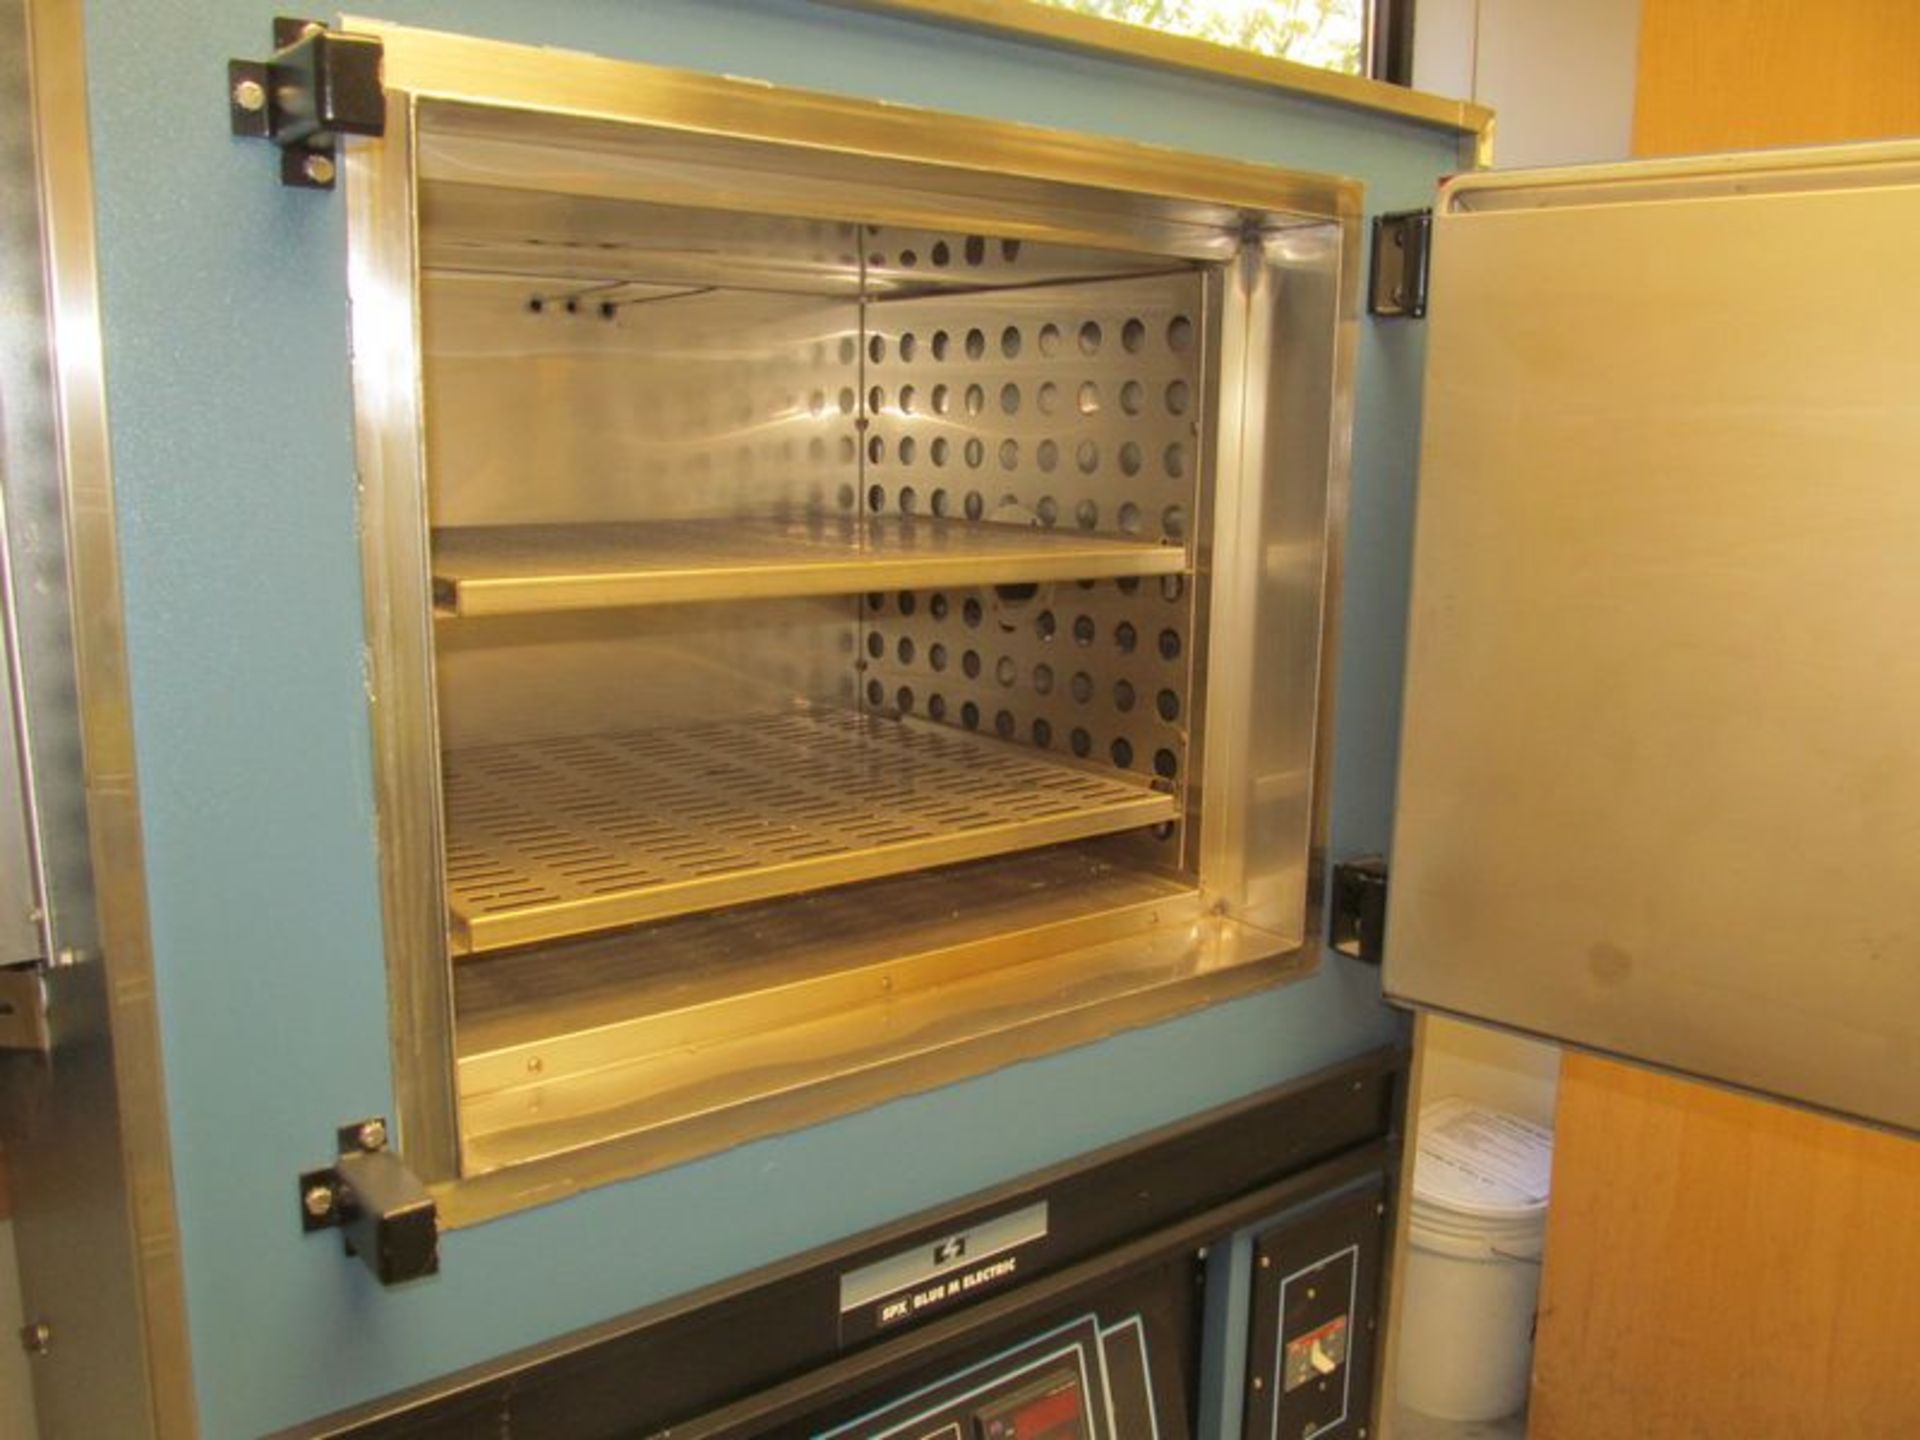 Blue M SPX evironmental chamber oven, M/N DCW-256-F-MP350, S/N 30239, temp rating 350 DegC, 240V, - Image 4 of 6